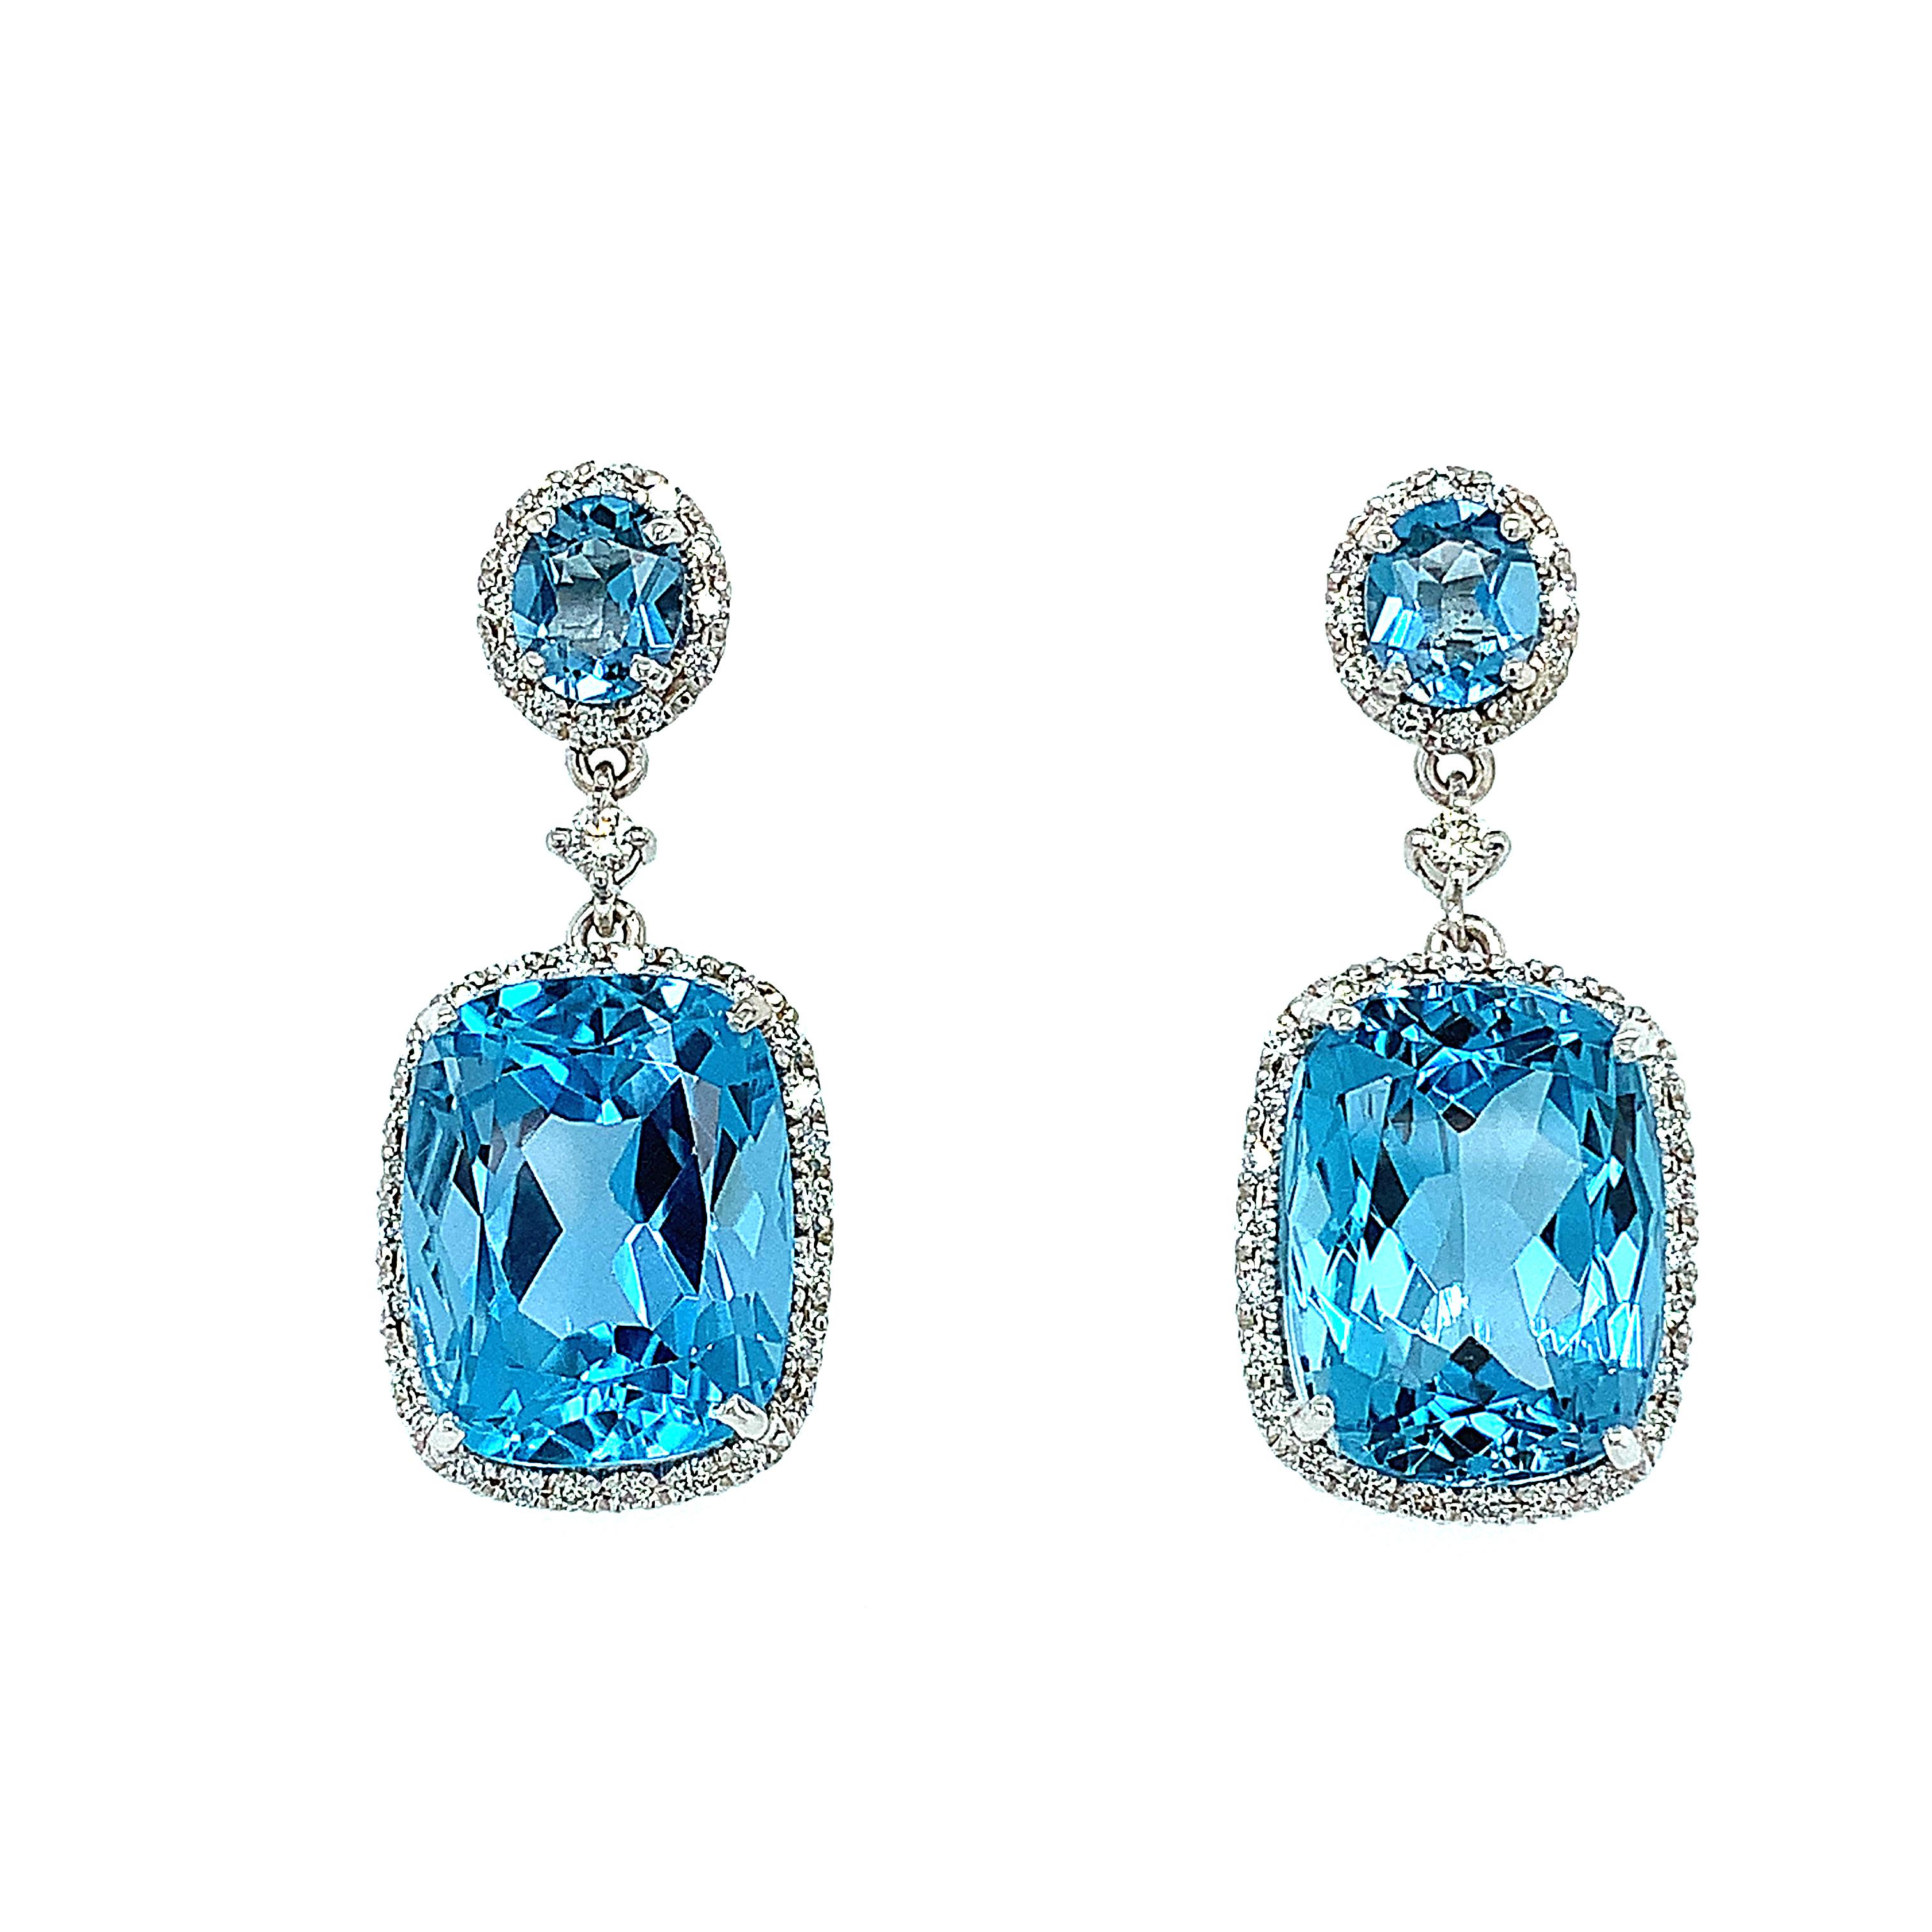 Topaz and diamonds art deco drop earrings 18k white gold In New Condition For Sale In London, GB